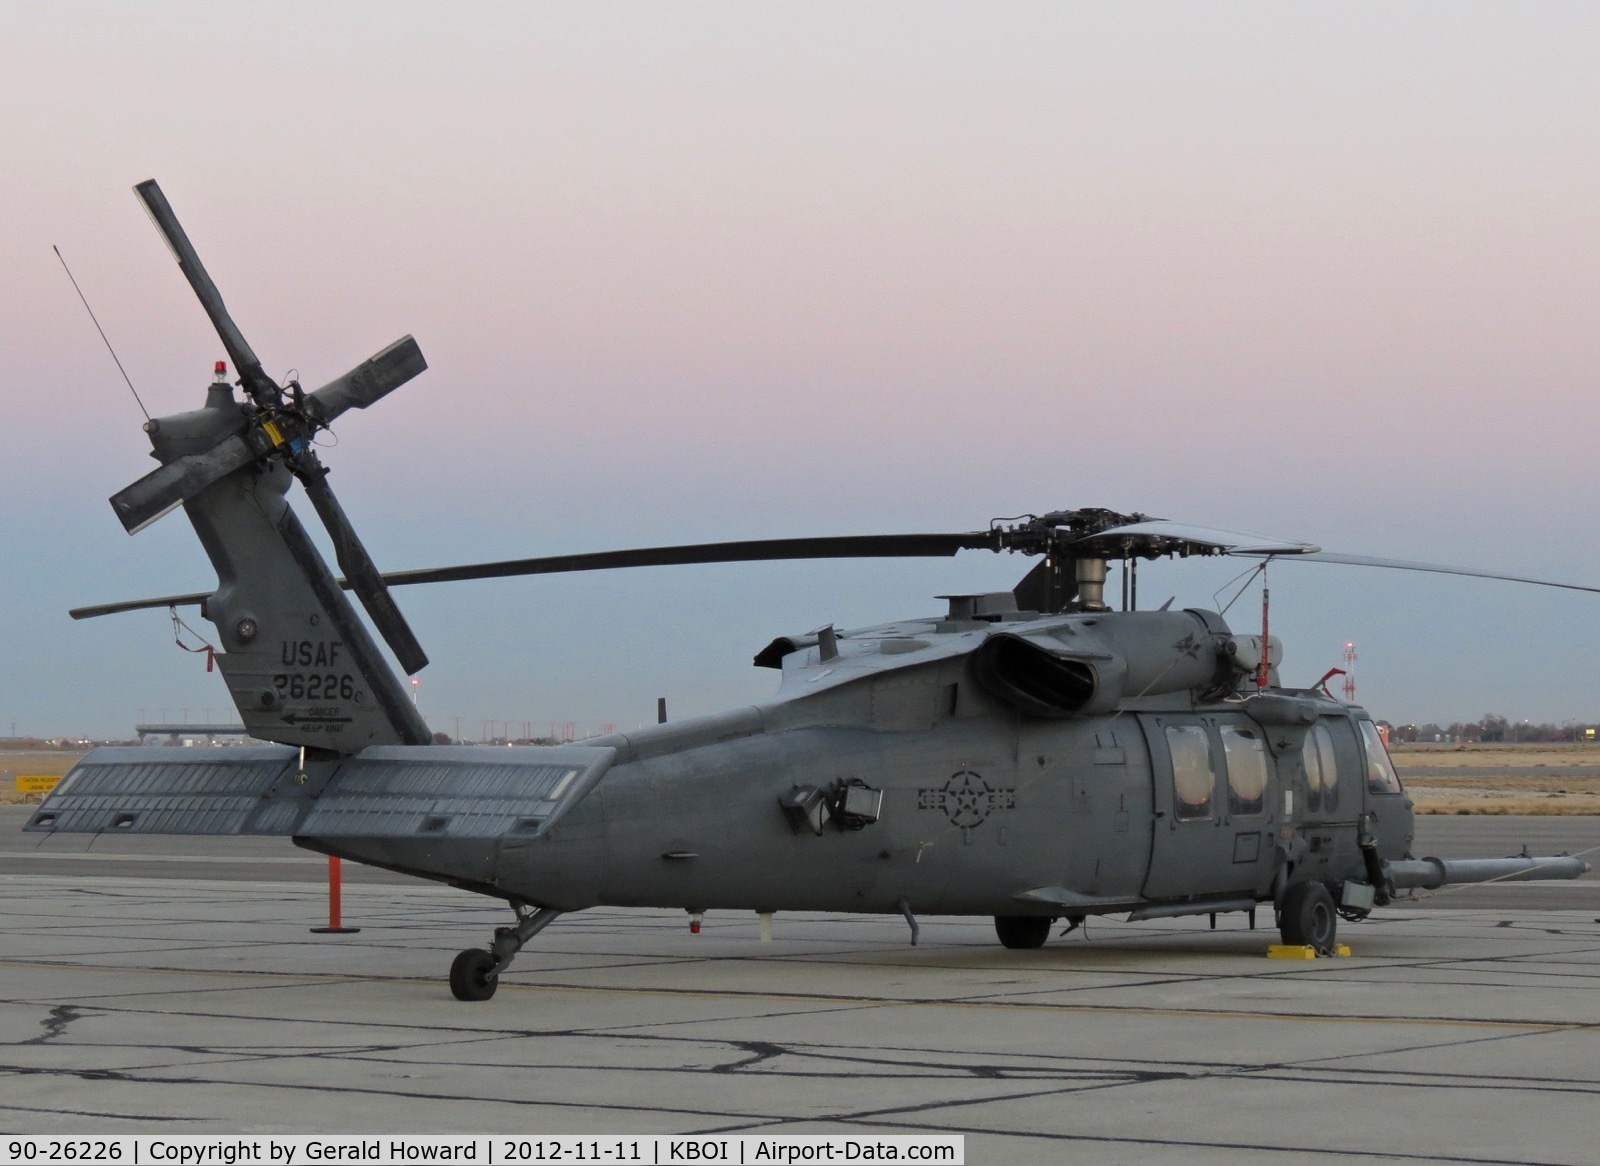 90-26226, 1990 Sikorsky HH-60G Pave Hawk C/N 70-1553, Parked on the south GA ramp.  305th RS, Davis-Monthan AFB, AZ.